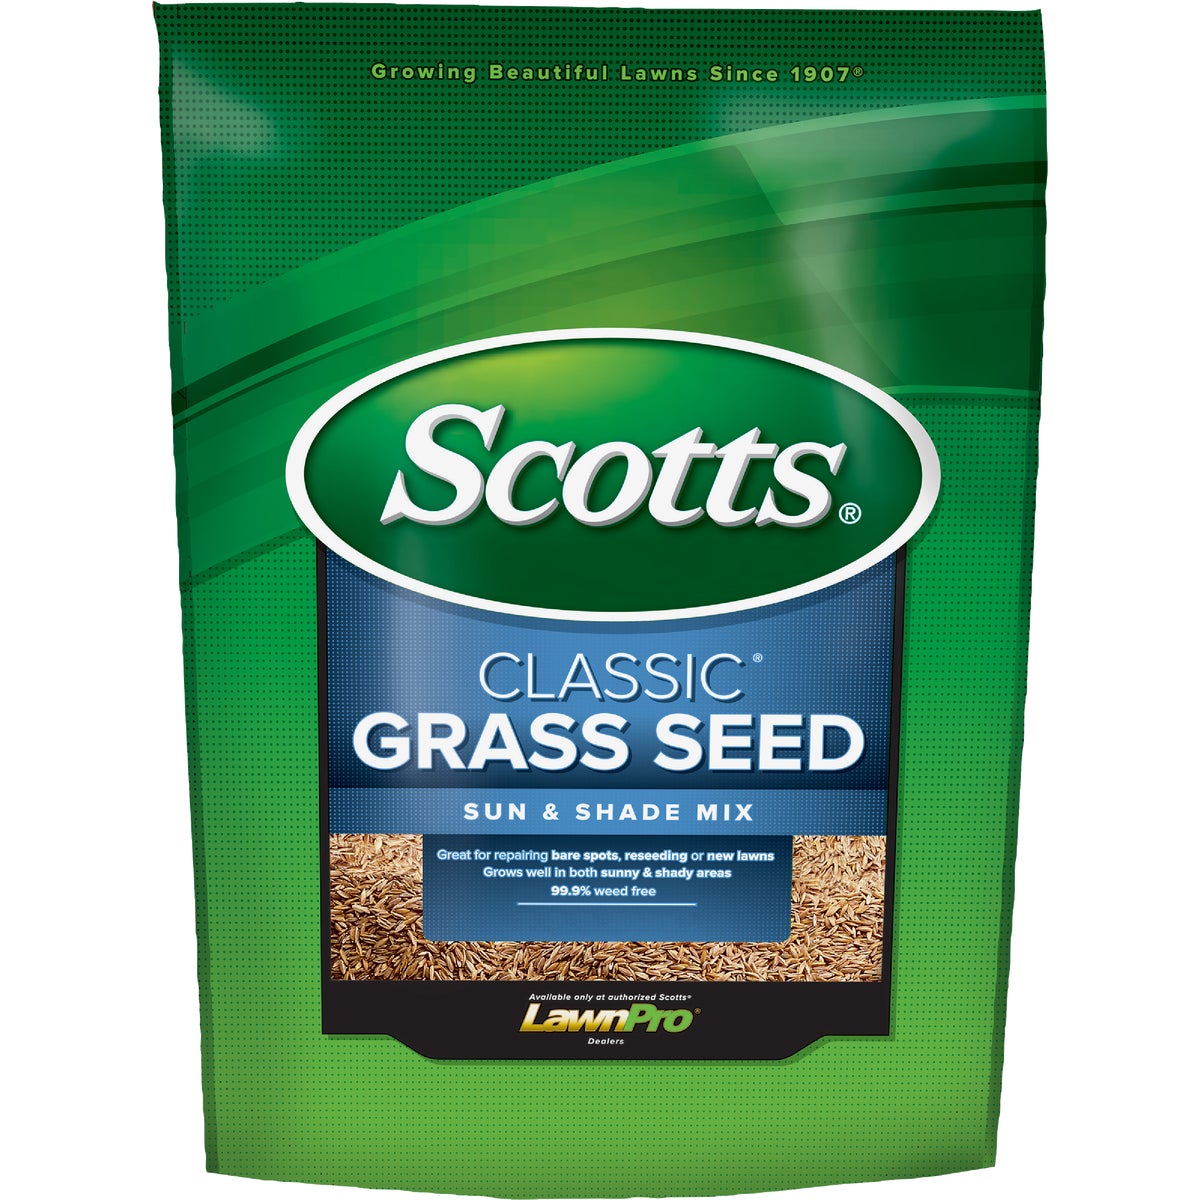 Item 700128, Reliable, all-purpose grass seed mix that grows well in sunny and shady 